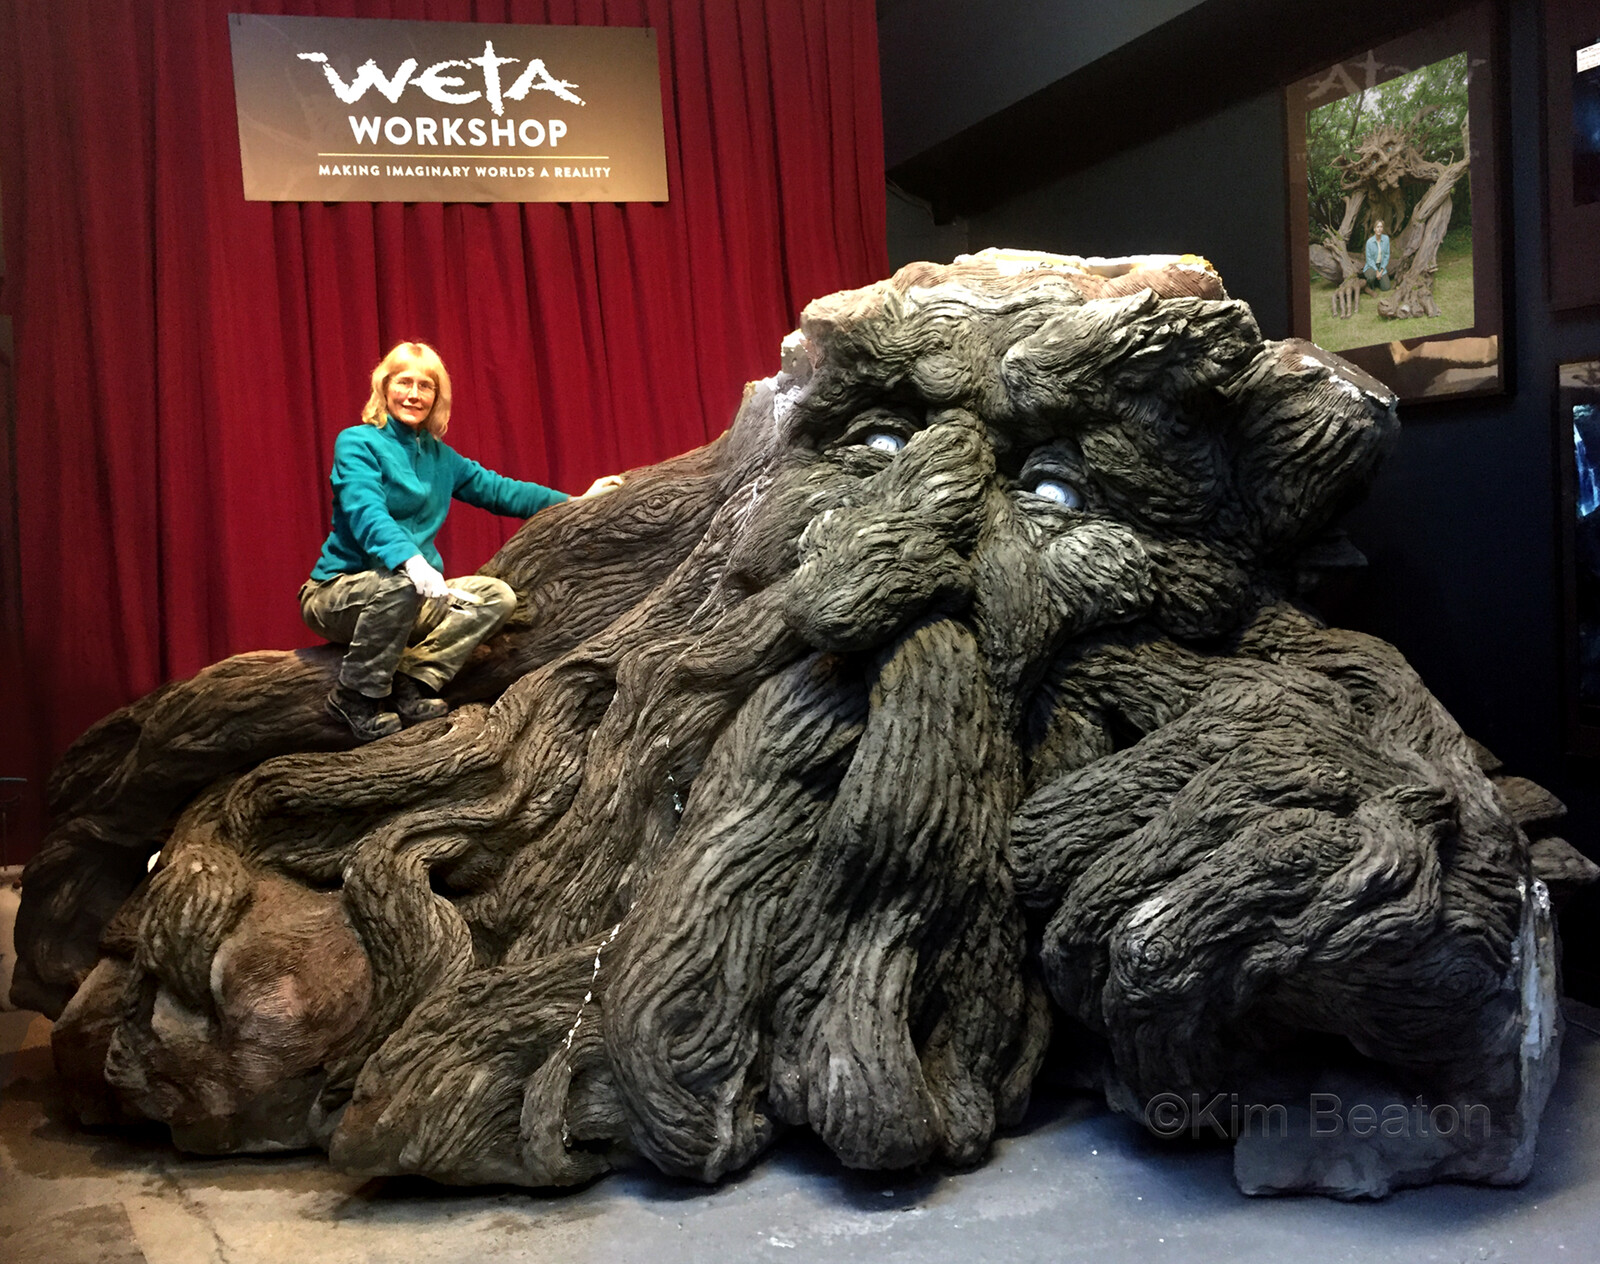 Tree man - Nearing completion. Waiting for his crown. On stage at Weta Workshop.